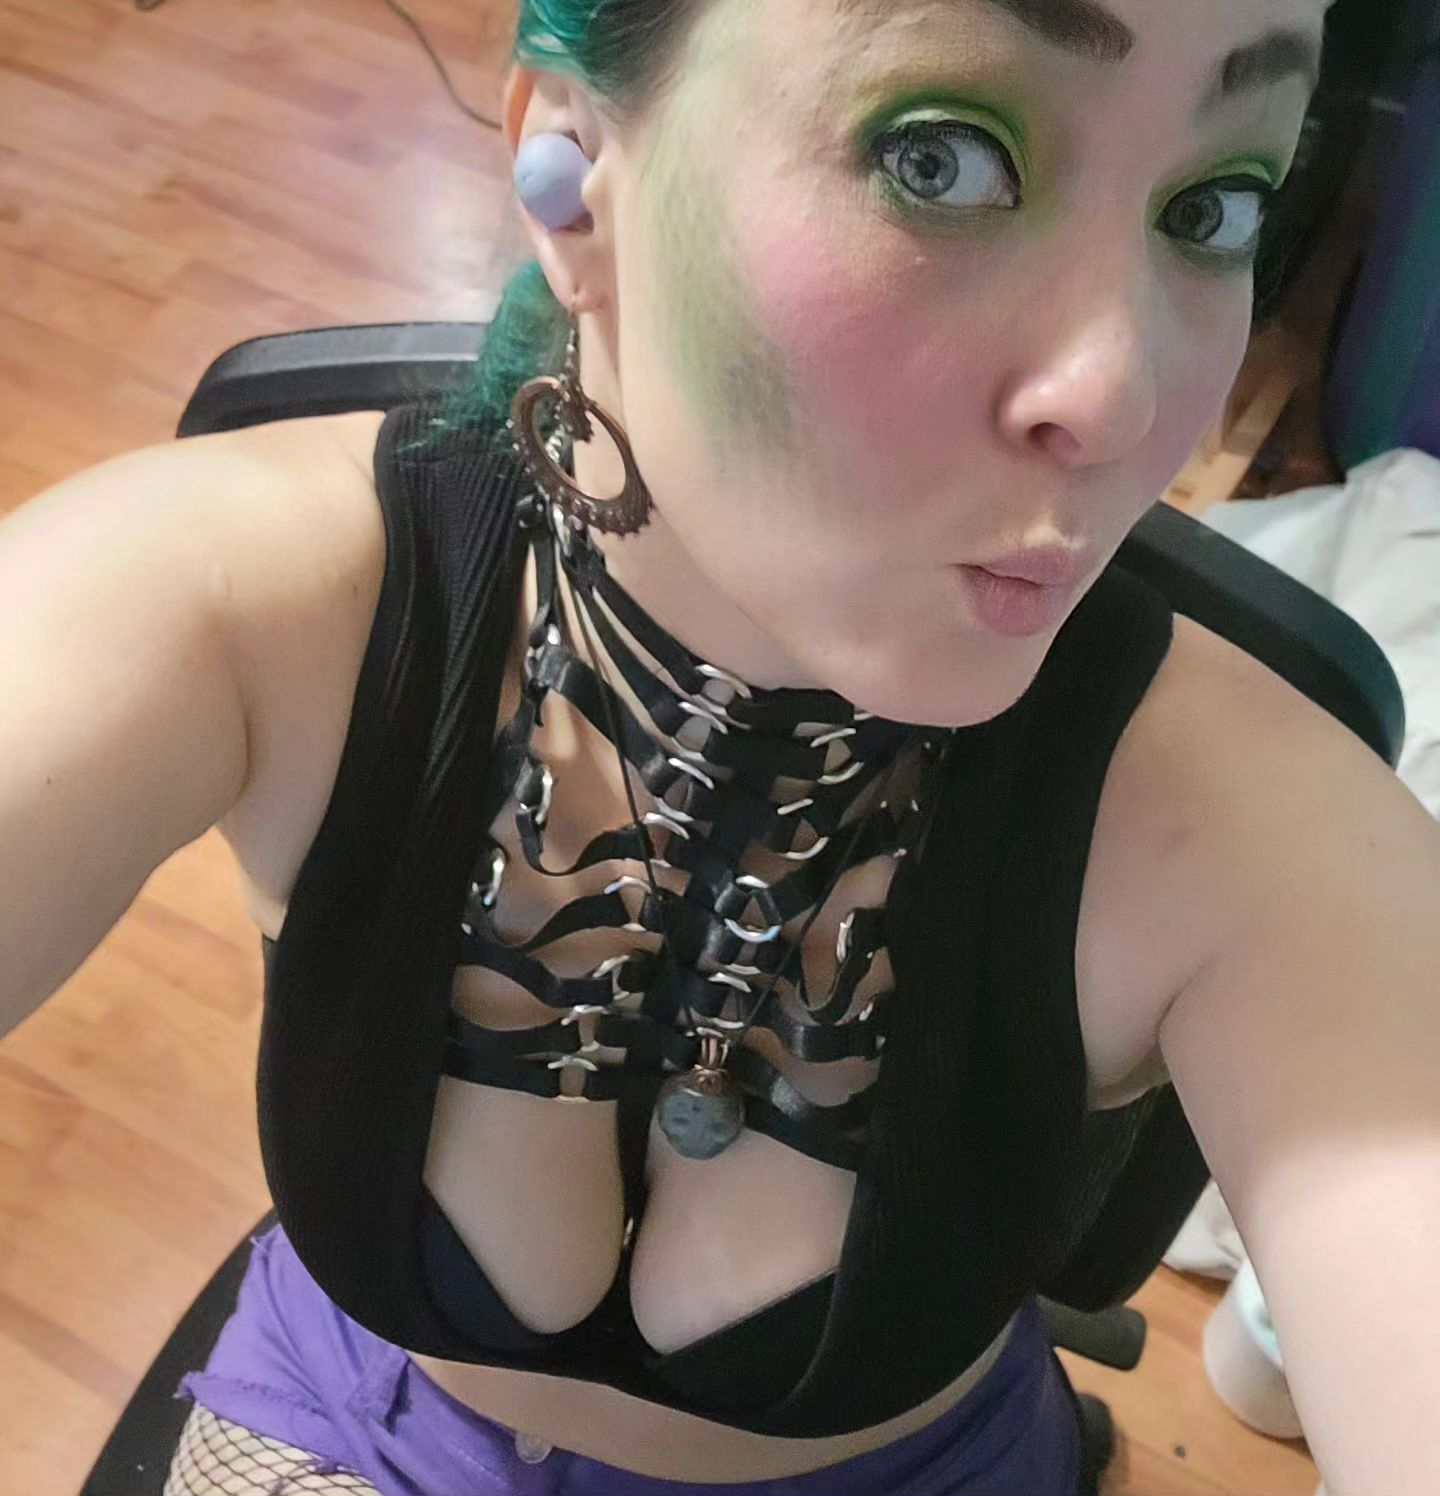 About to play #d&d all day with some friends. My character is a lizard necromancer. Do I look the part?
.
.
.
.
#altgirl #altgirlsofig #altgirlof #onlyfanslinkinbio #onlyfanzgirl #onlyfansmodel #onlyfansnewbie #ofgirls #onlyfansfree #onlyfanz